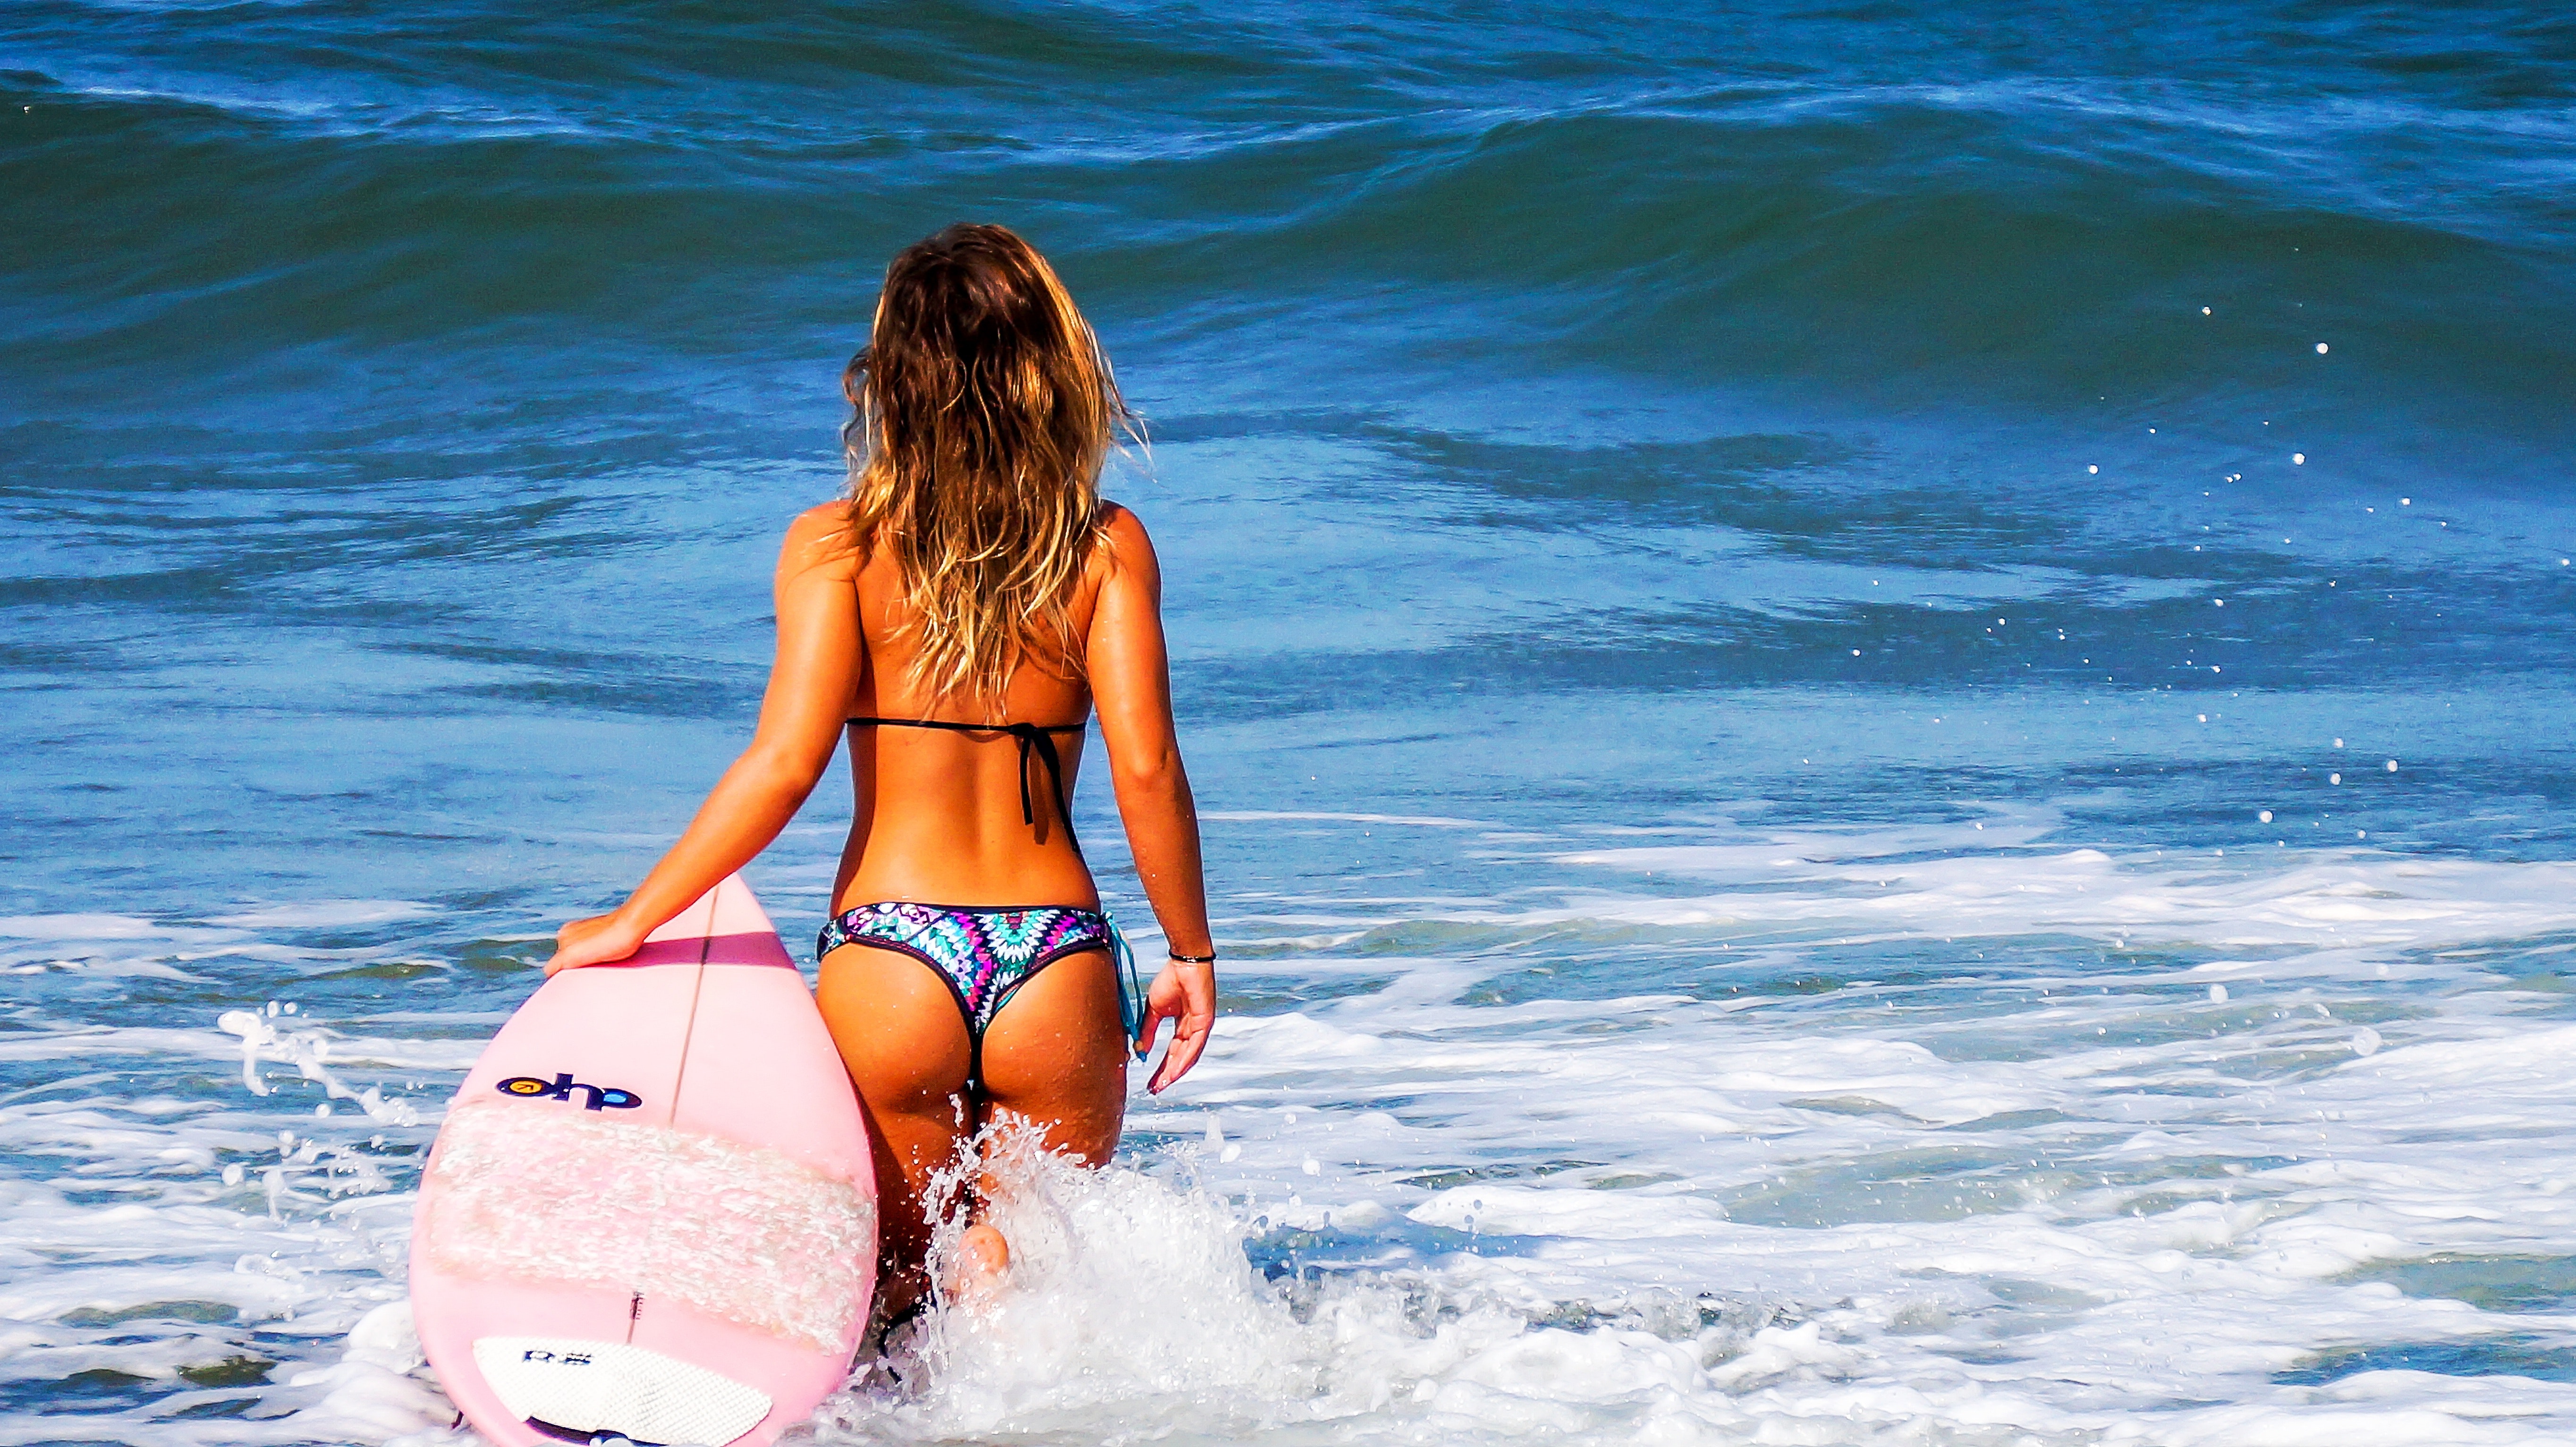 Woman on Large Body of Water during Daytime Holding Surf Board, Beach, Sexy, Wave, Water, HQ Photo